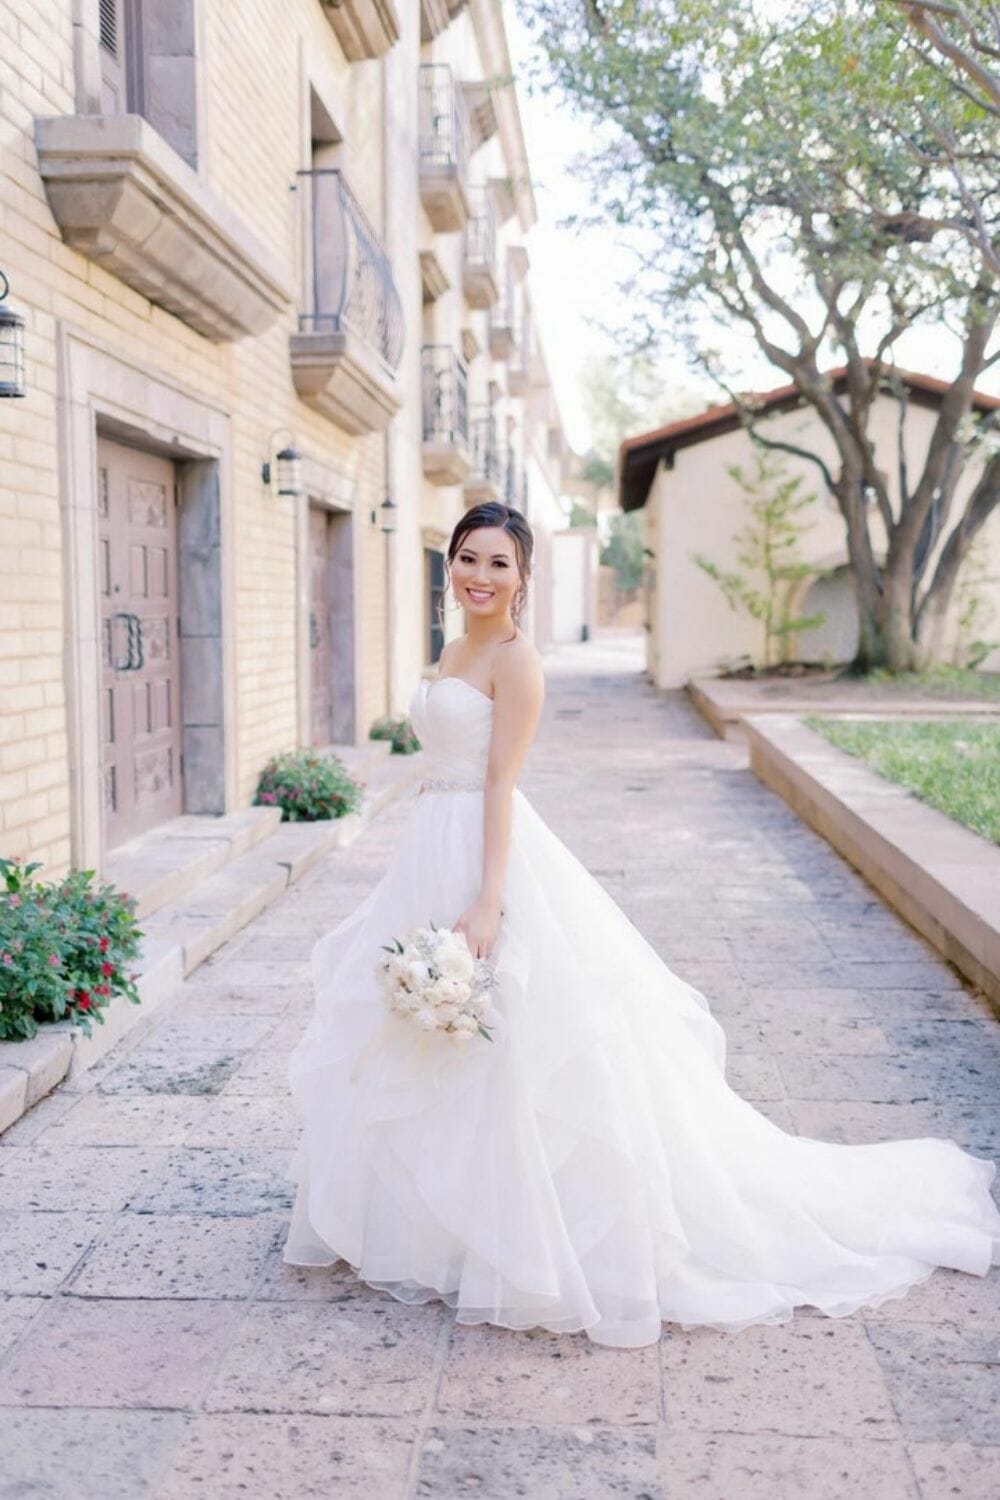 Tulle Ball Gown Wedding Dress photo by Nhan Nguyen Photography